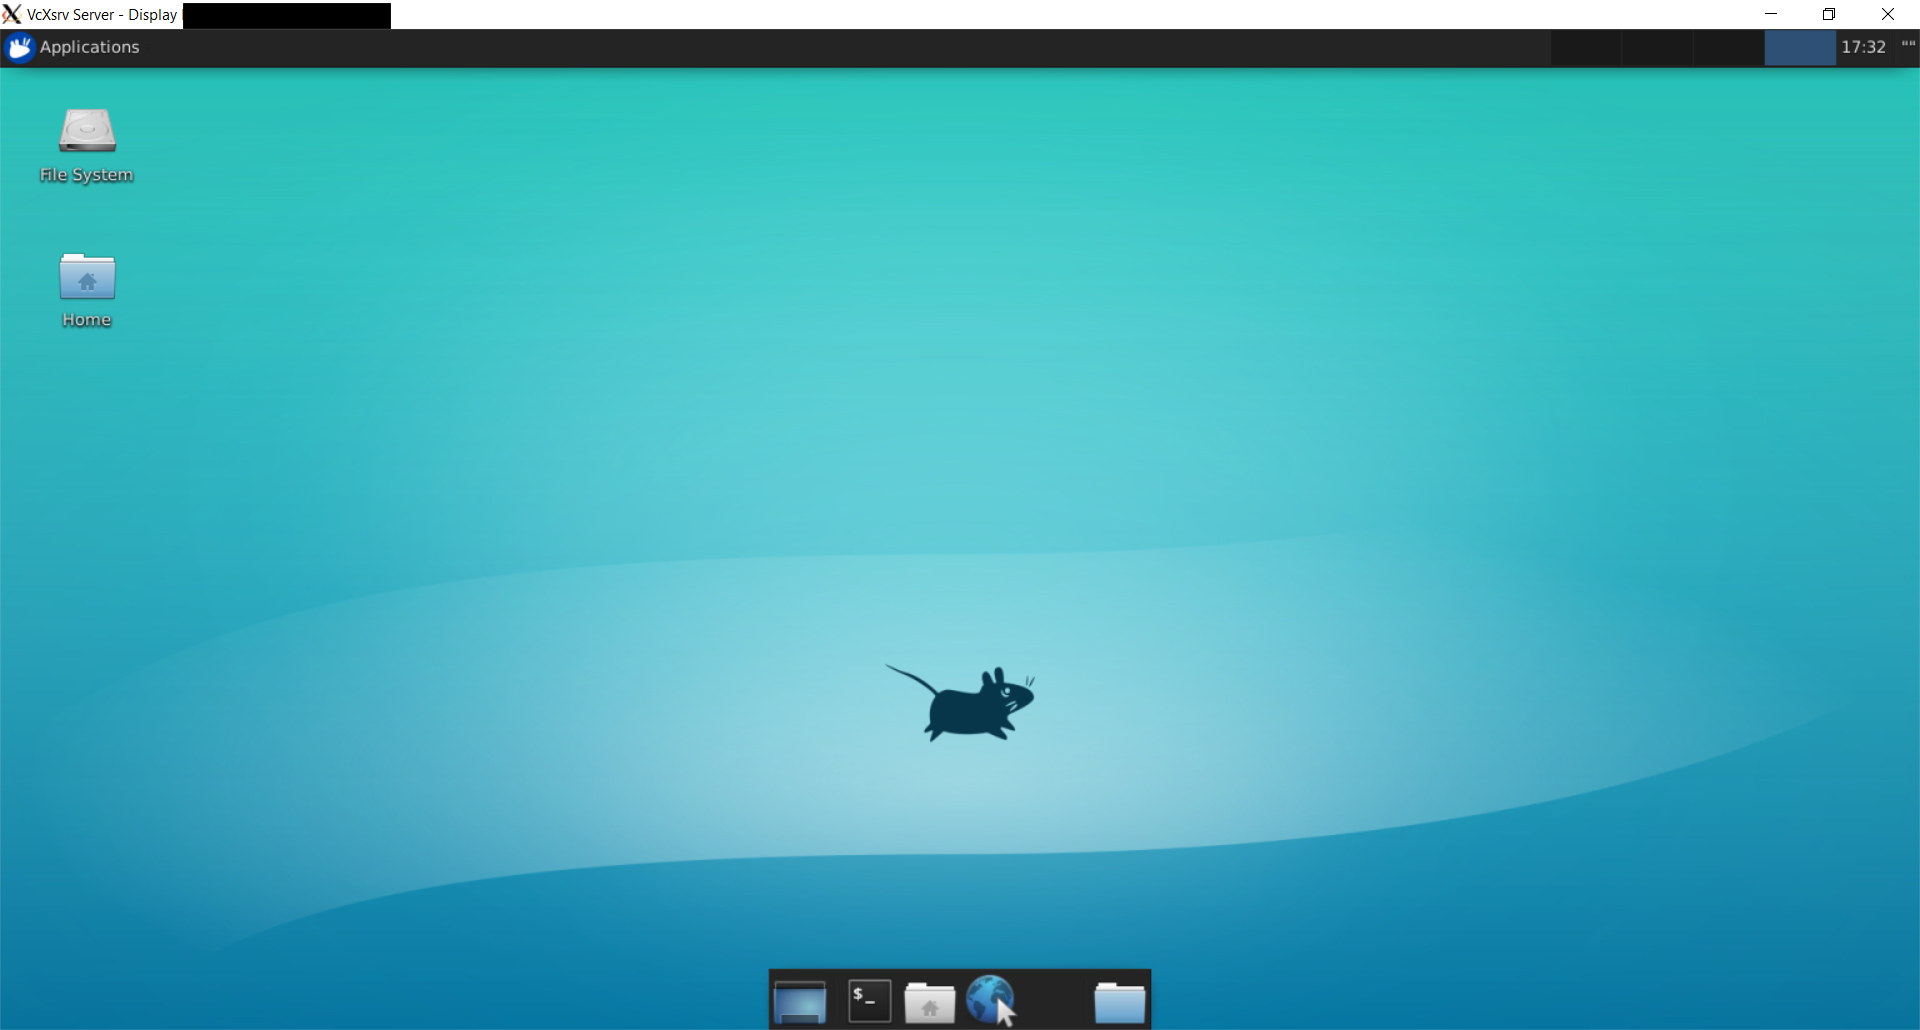 Xfce 4 running under Windows Subsystem for Linux